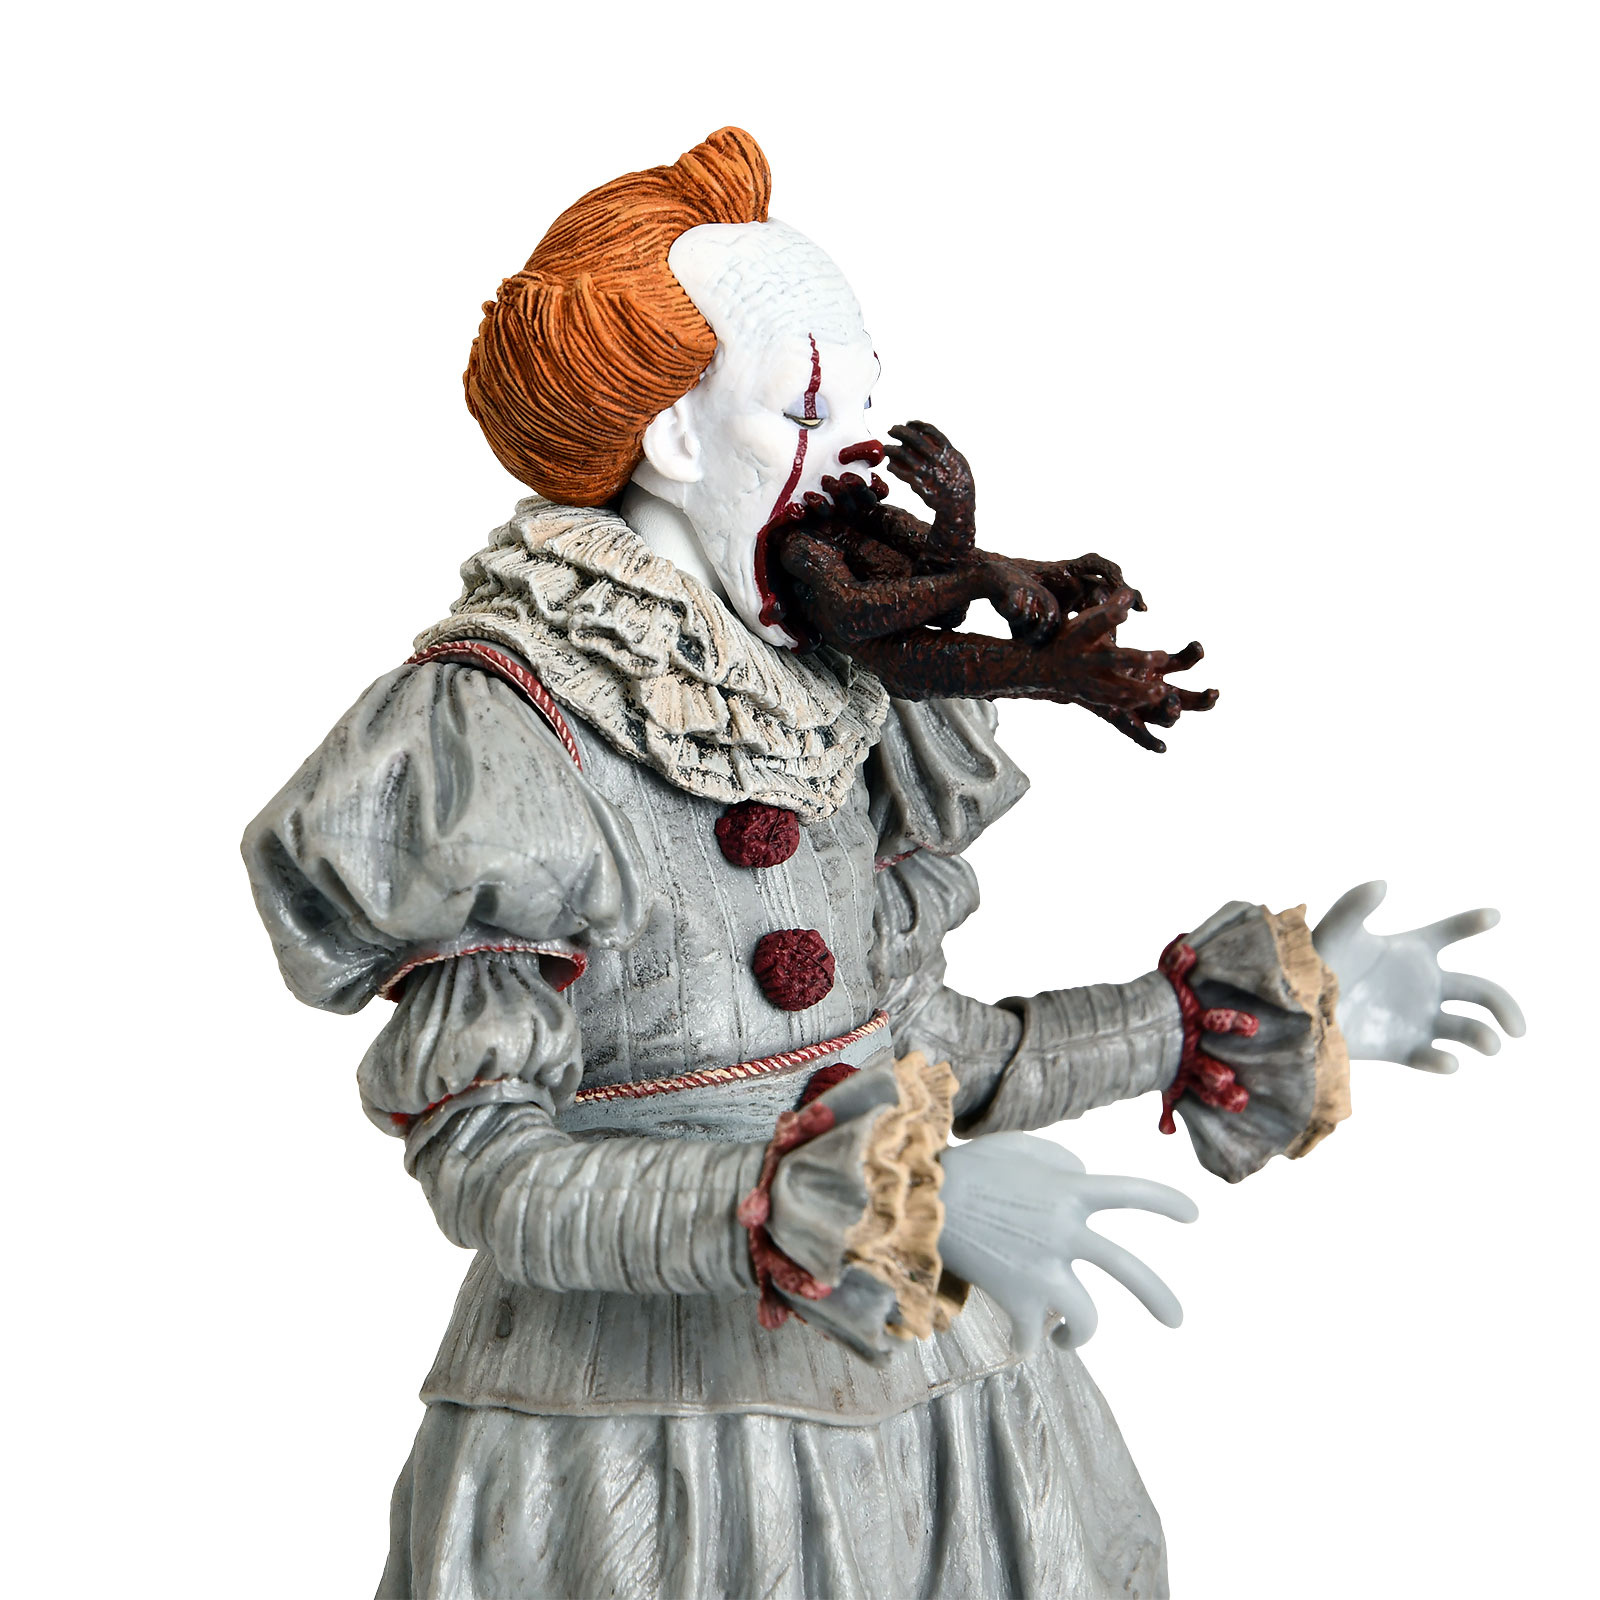 Stephen King's IT - Pennywise Dancing Clown Action Figure 19 cm